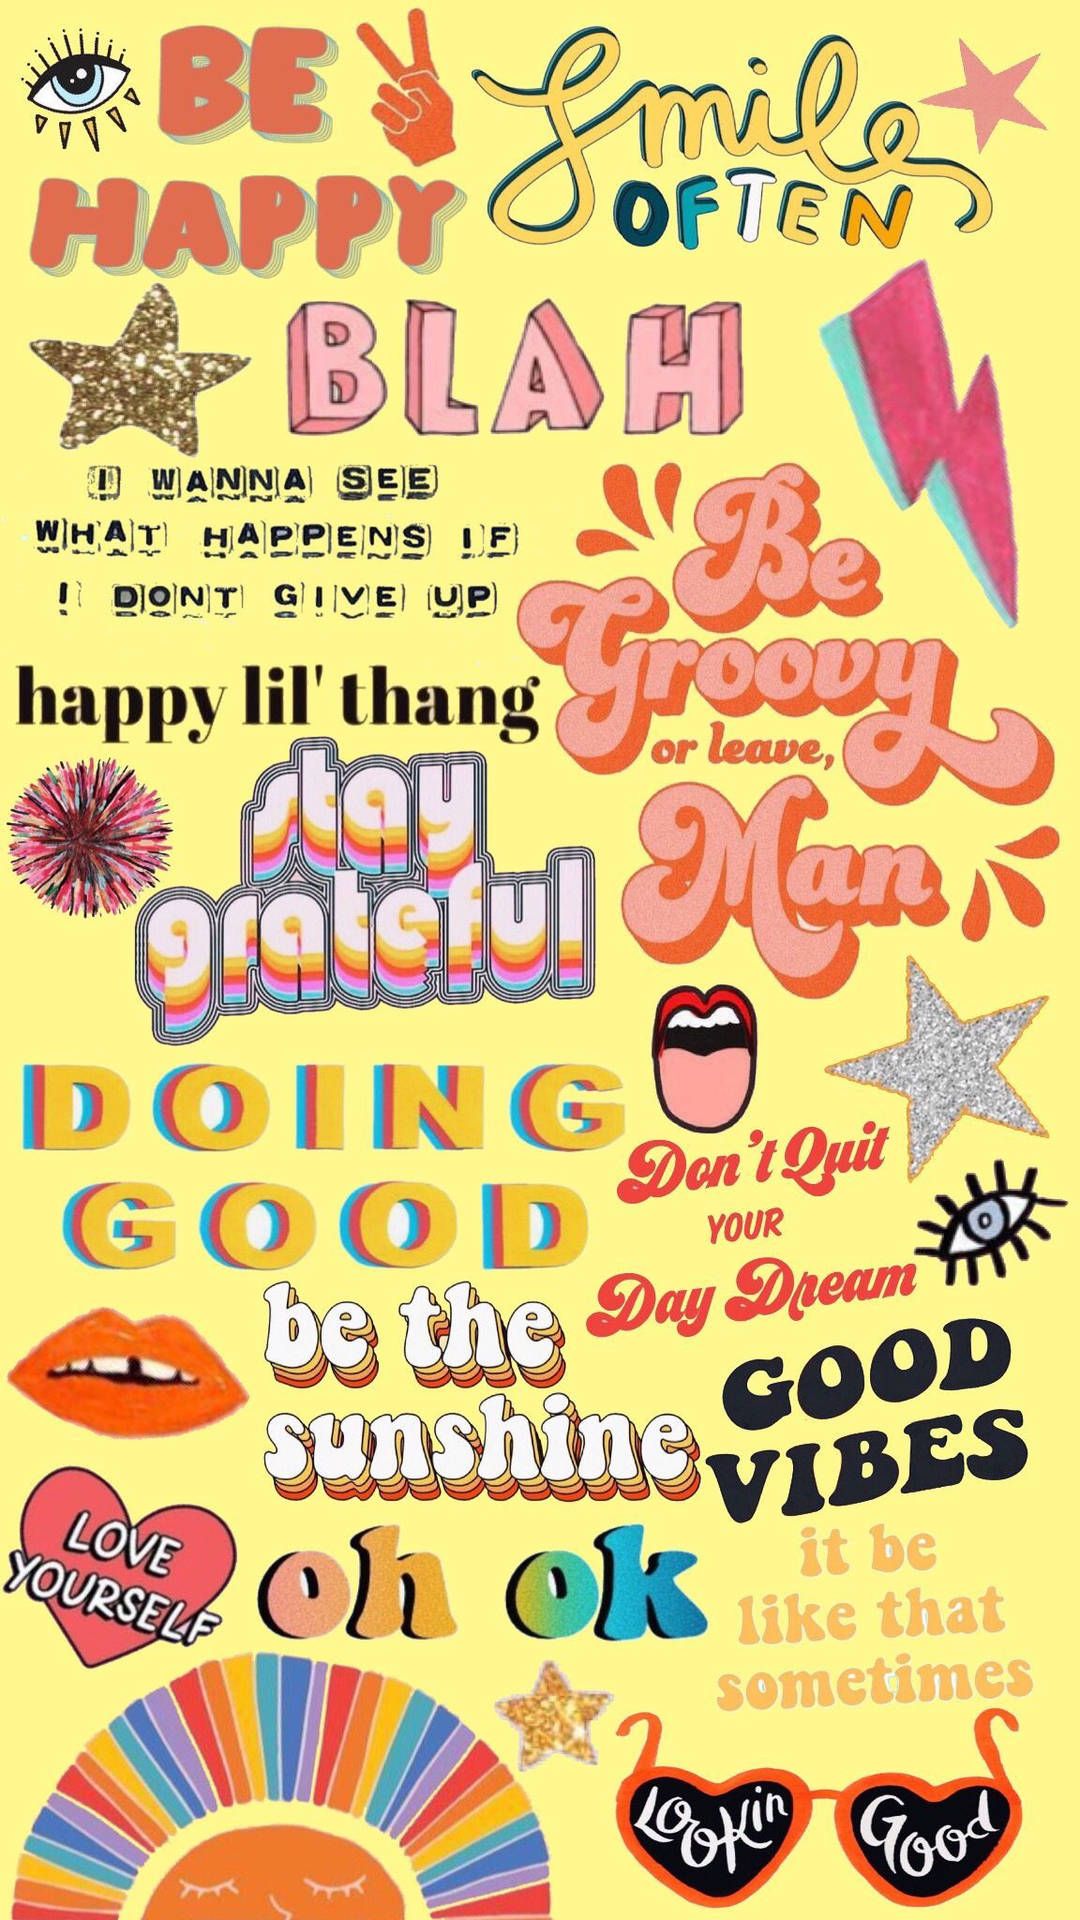 Download Good Vibes Aesthetic Stickers Wallpaper